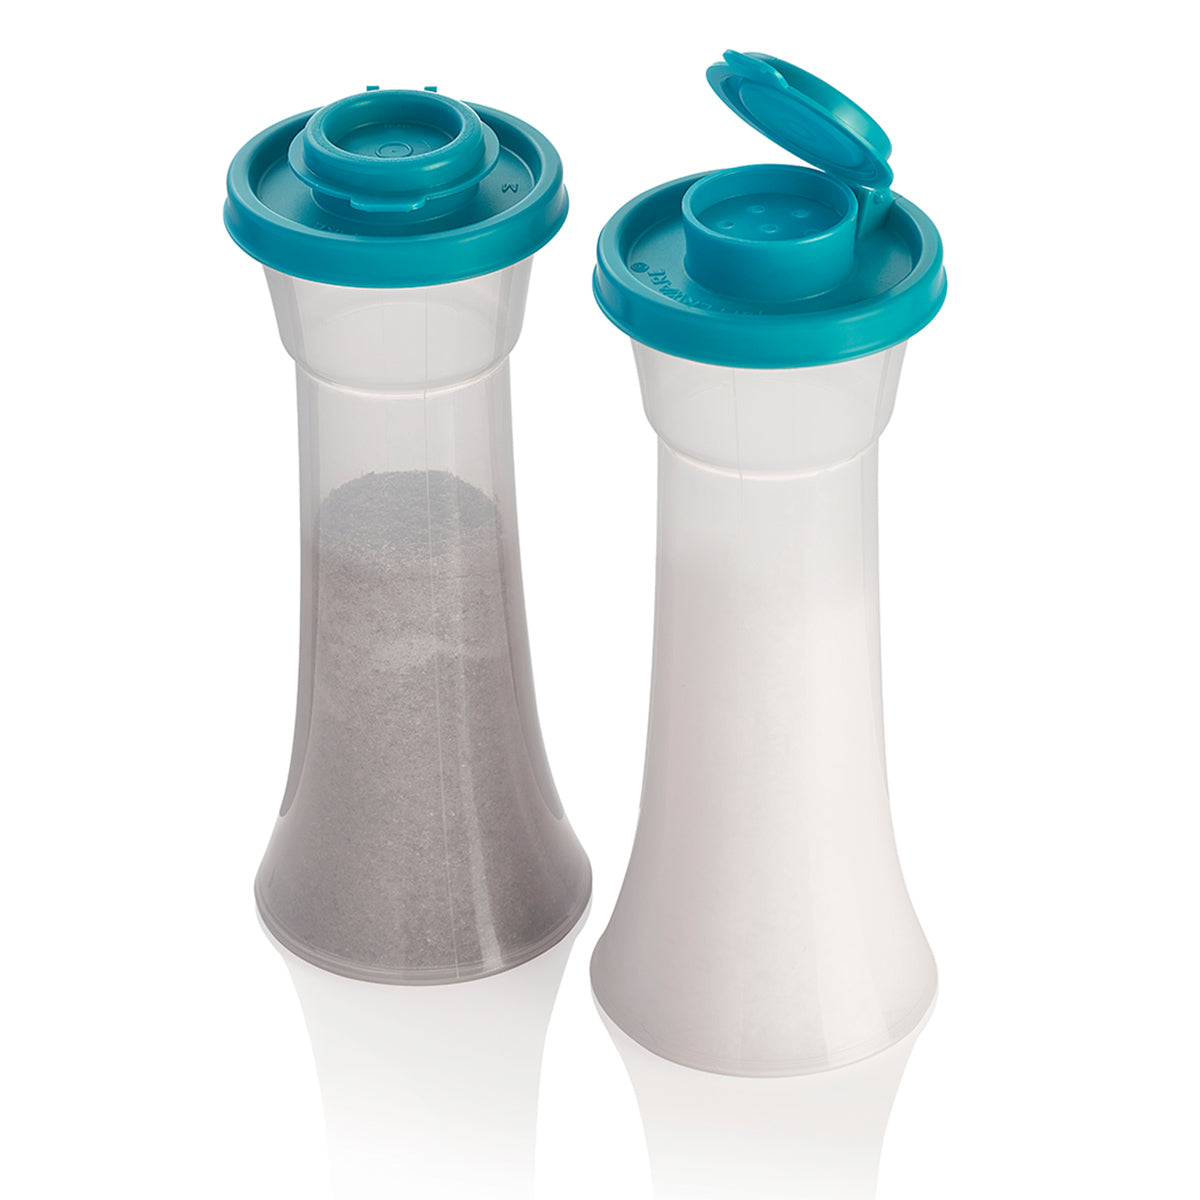 Tupperware Salt and Pepper Shakers - The Flavor Dance